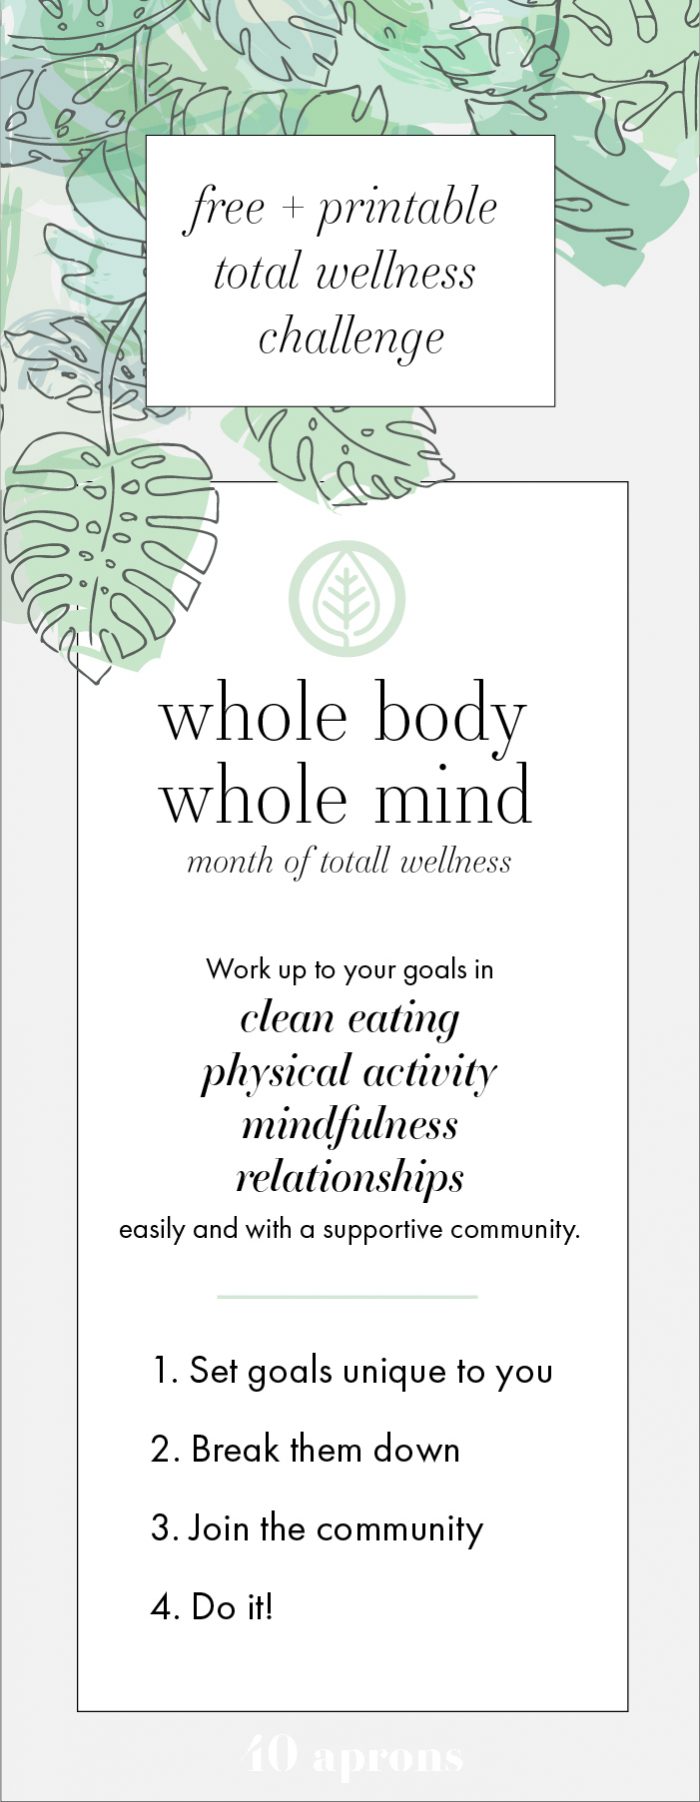 Whole Body Whole Mind Wellness Challenge is a free monthlong challenge that helps you work up to your goals: clean eating goals, physical activity goals, mindfulness goals, and relationship goals. This wellness challenge is more than just a clean eating challenge, it's motivation to put healthy habits in place for good. This printable challenge is totally free, too.